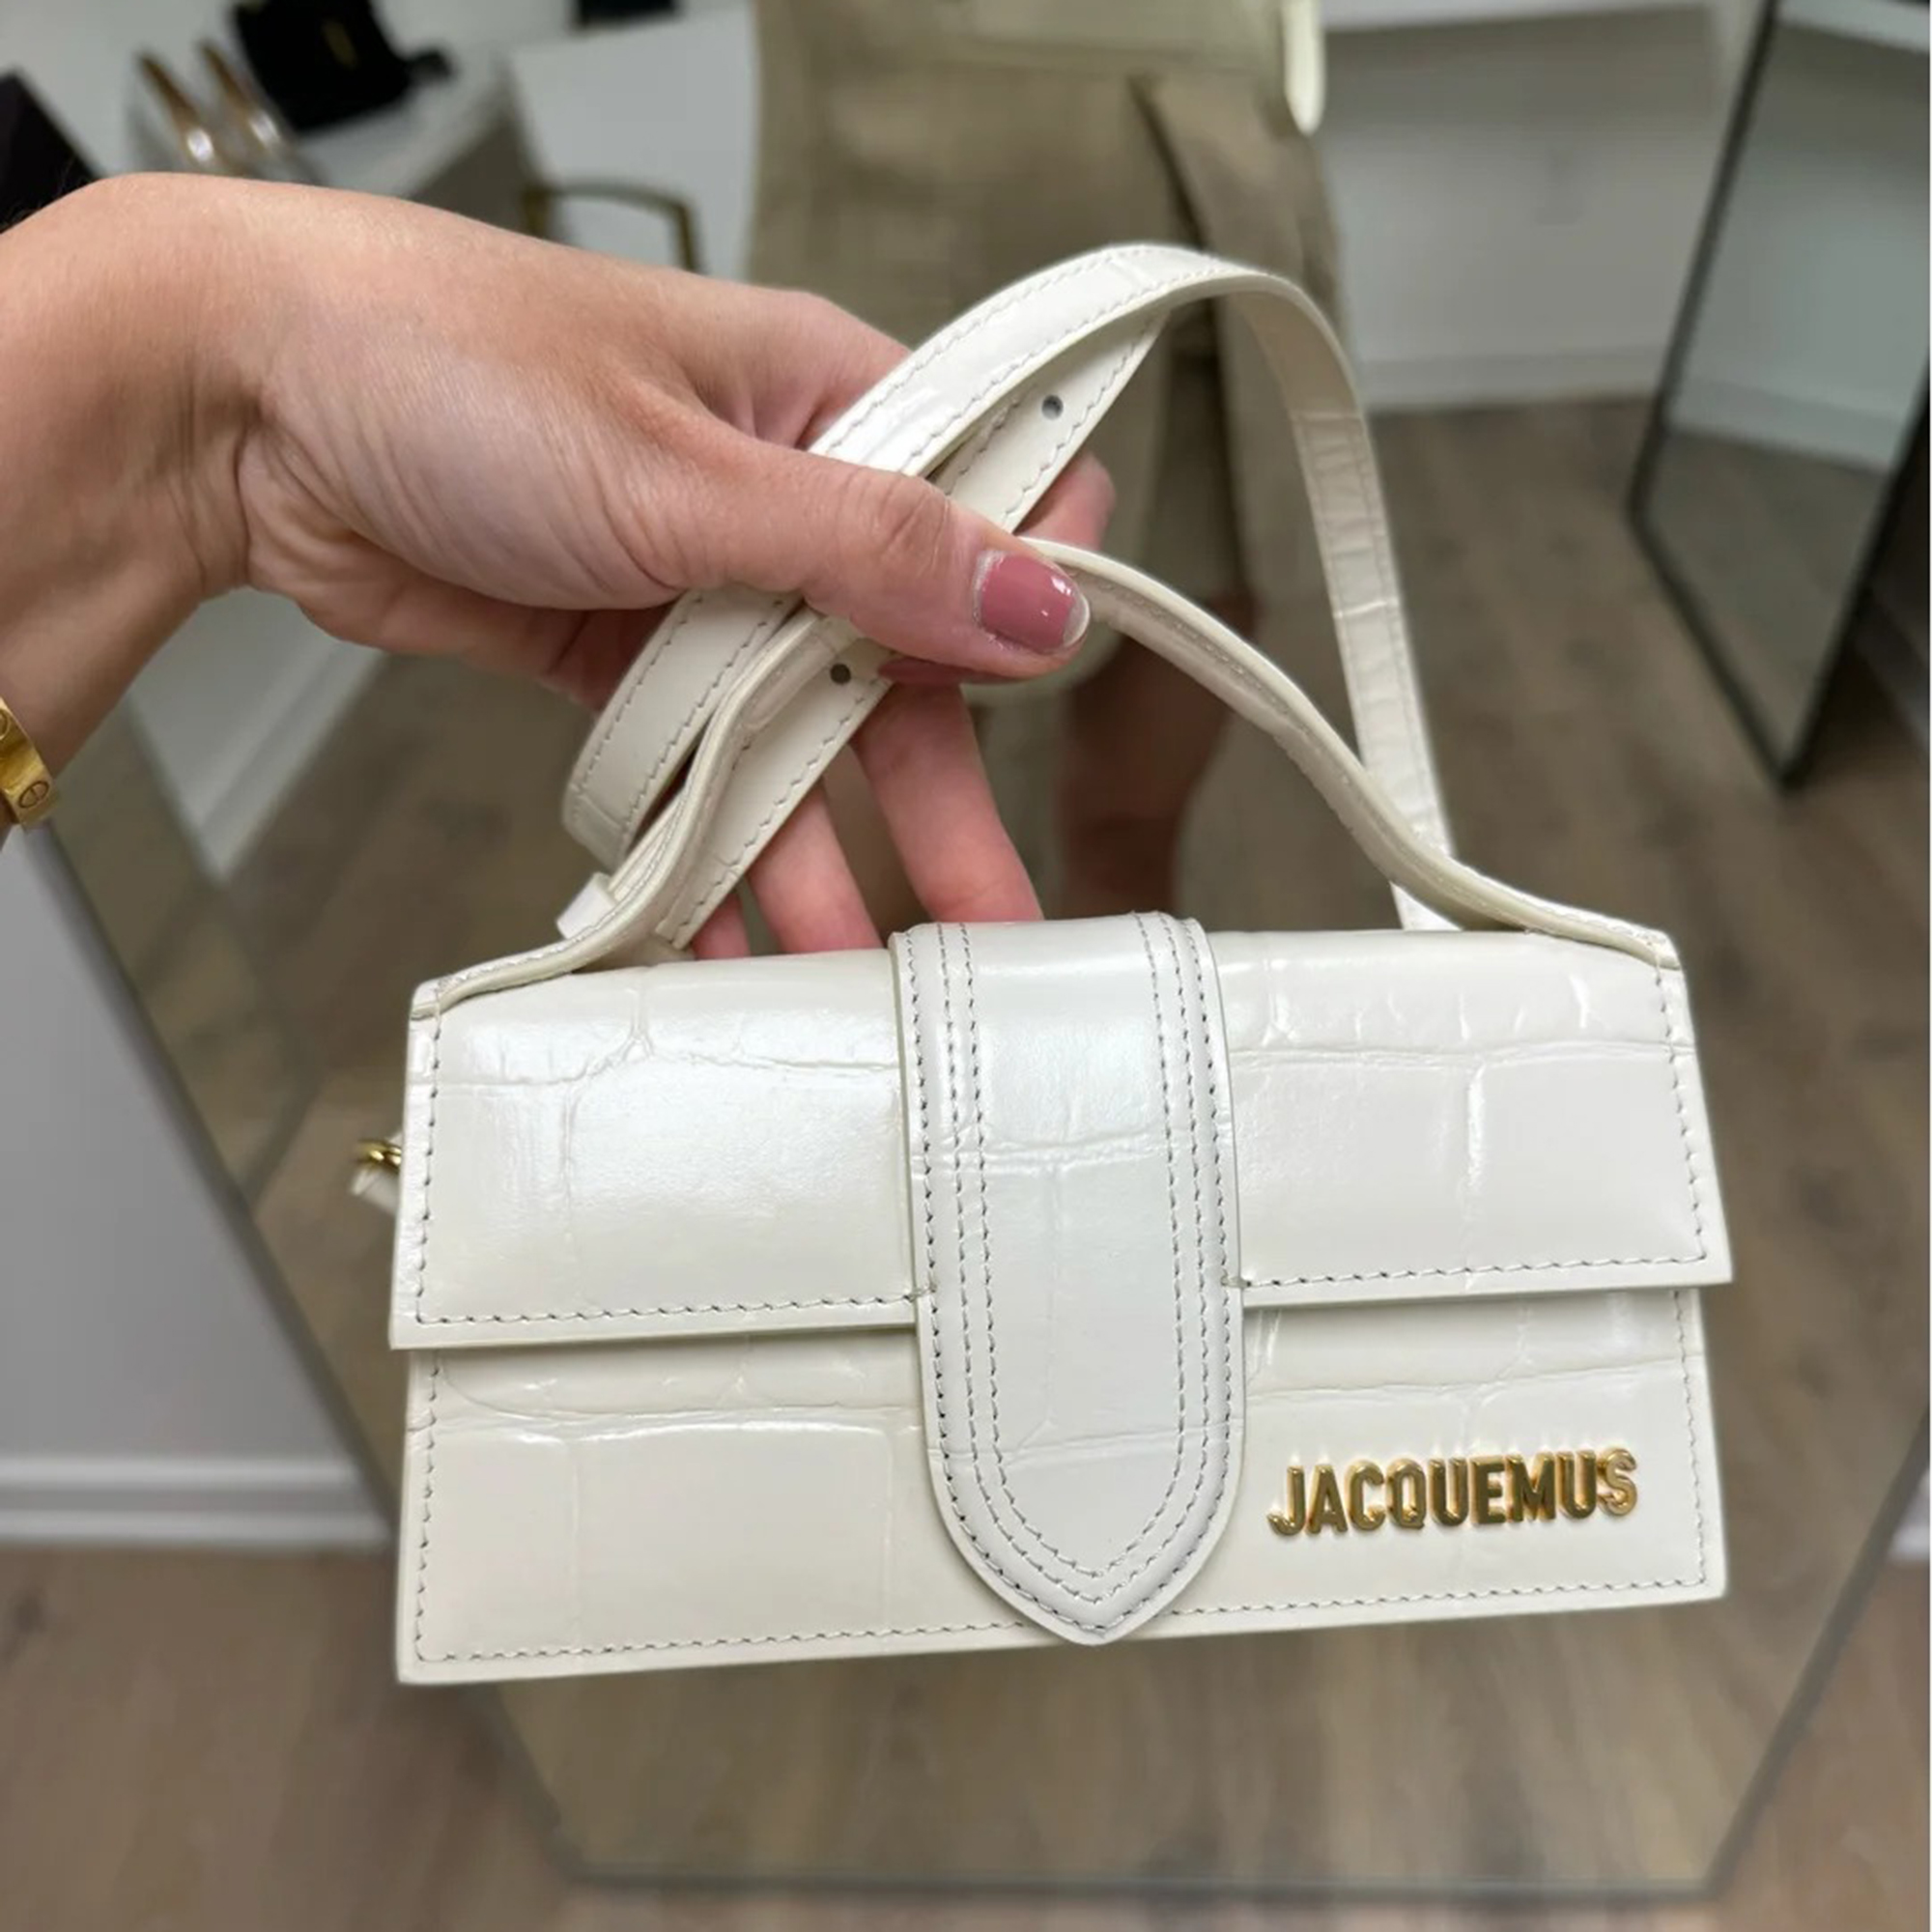 Jacquemus off-white croc embossed le bambino bag